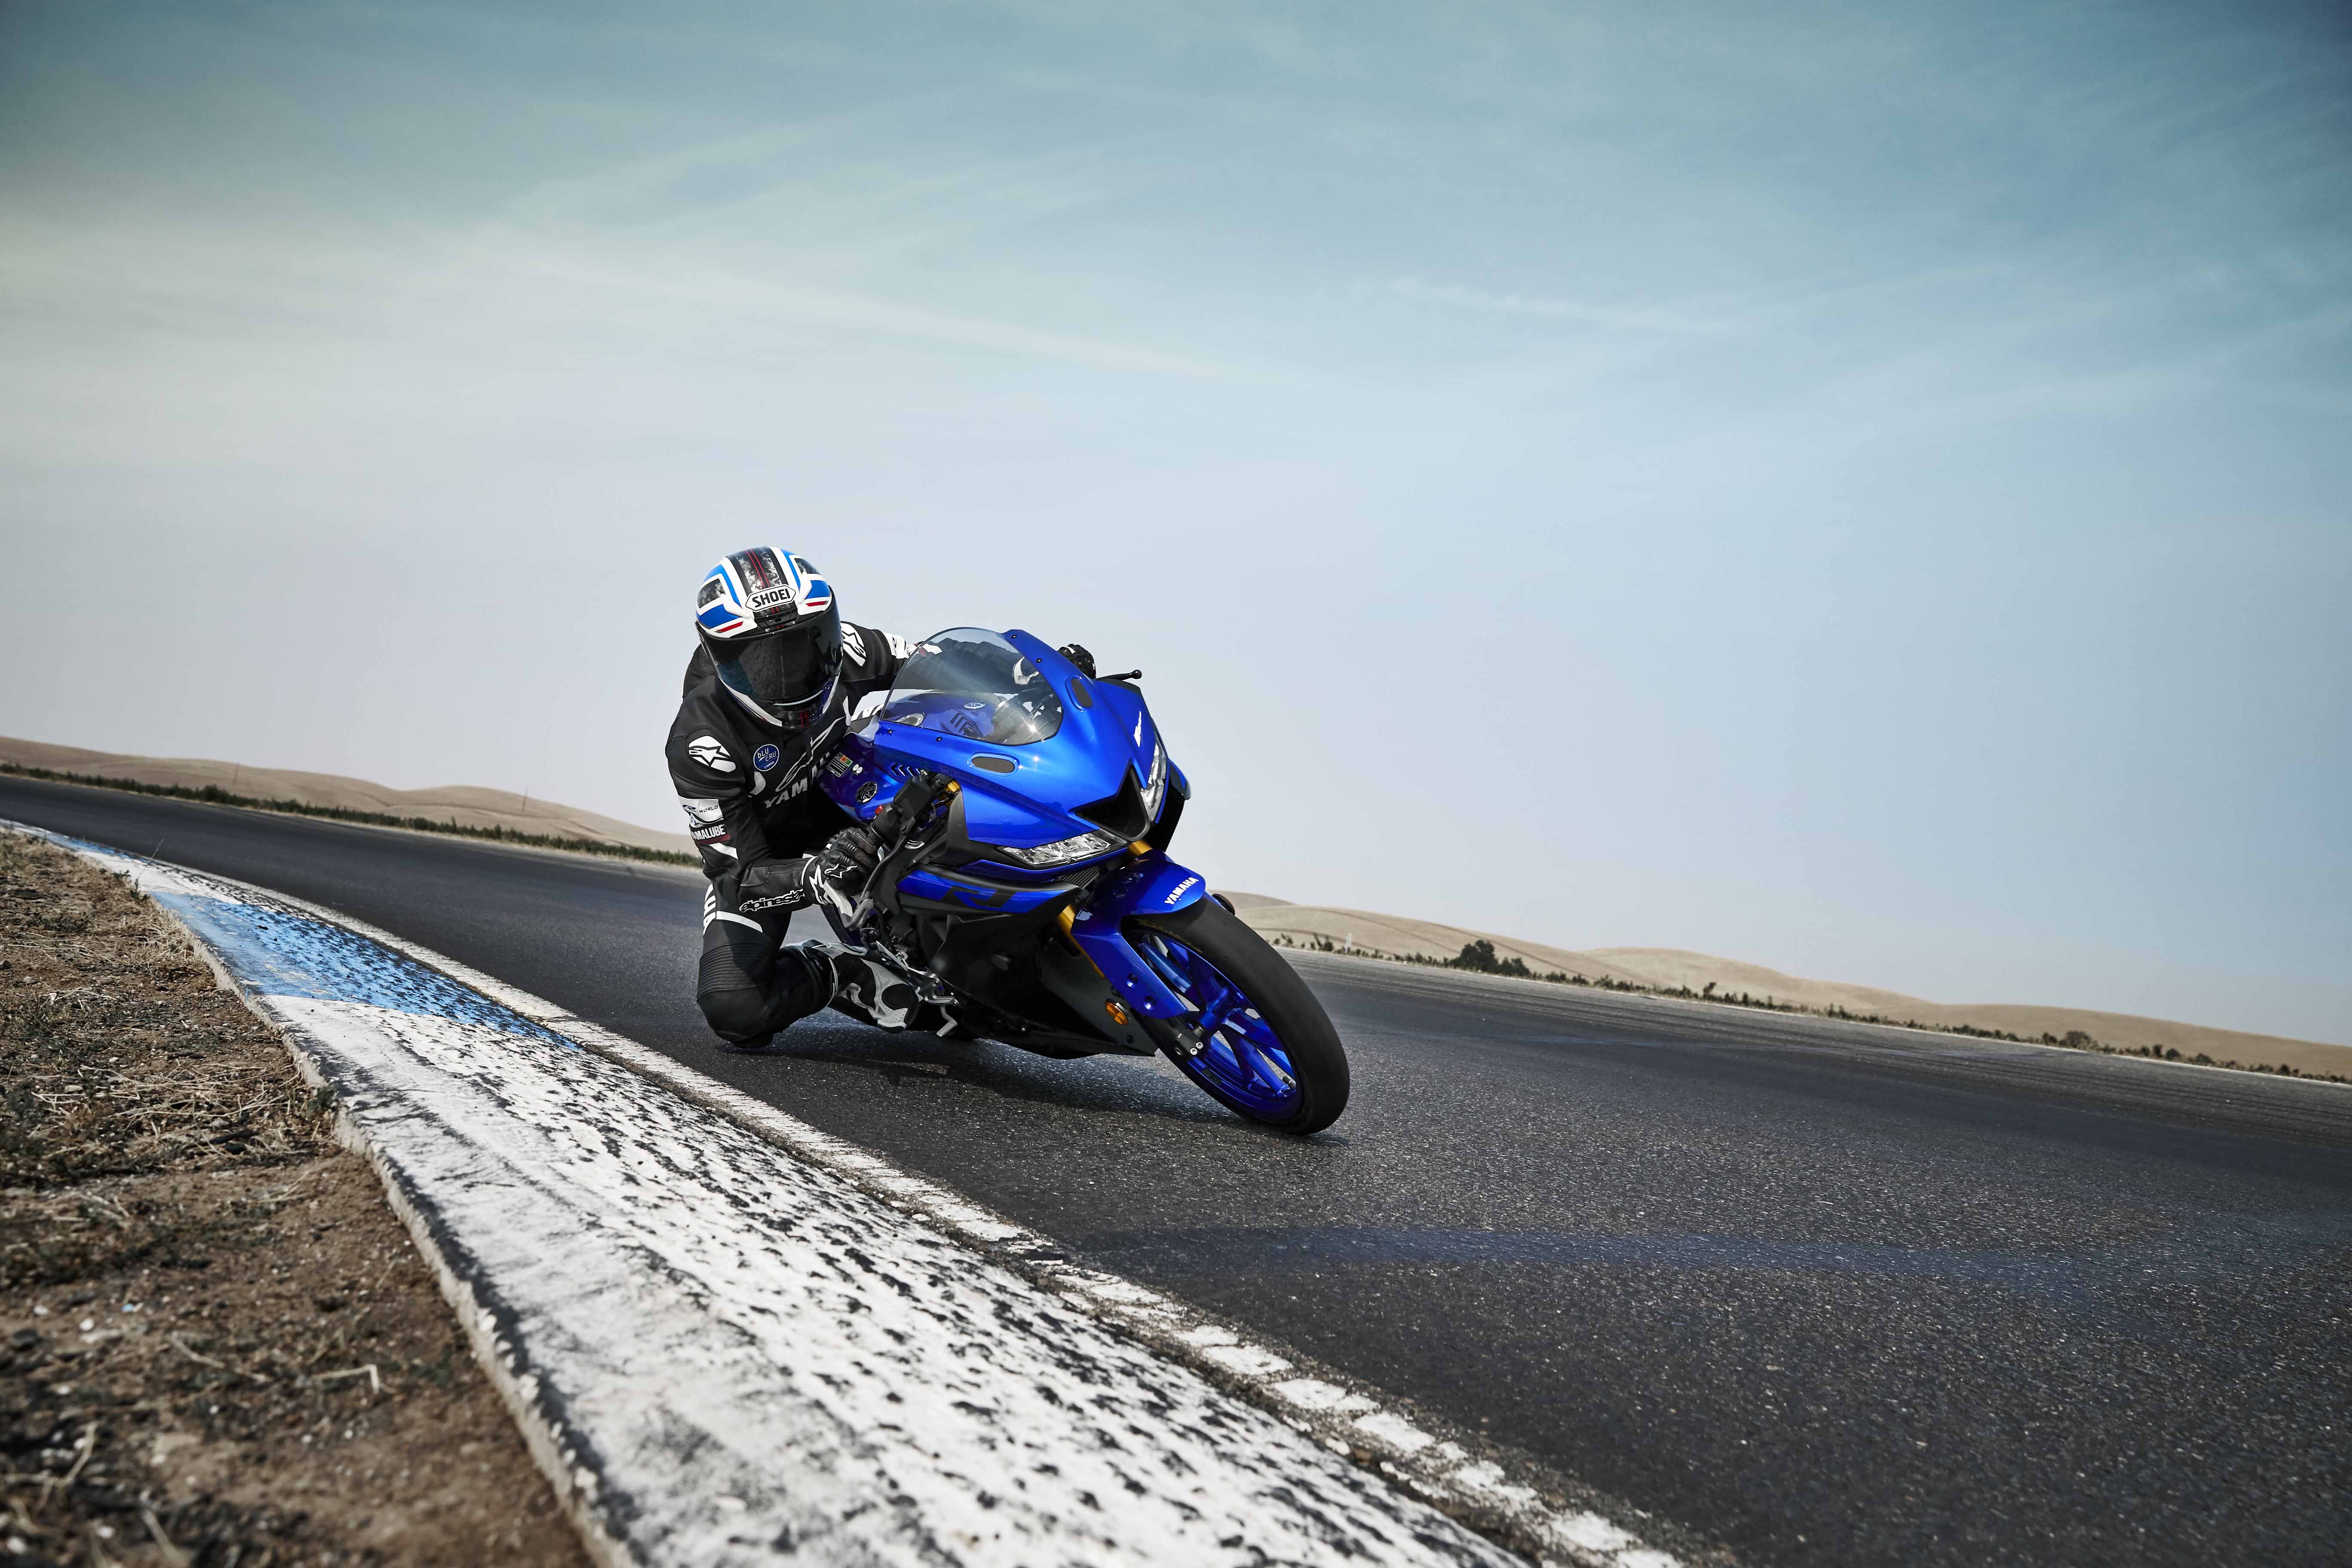 Yamaha introduces an all-new 2019 YZF-R125: Faster and sharper